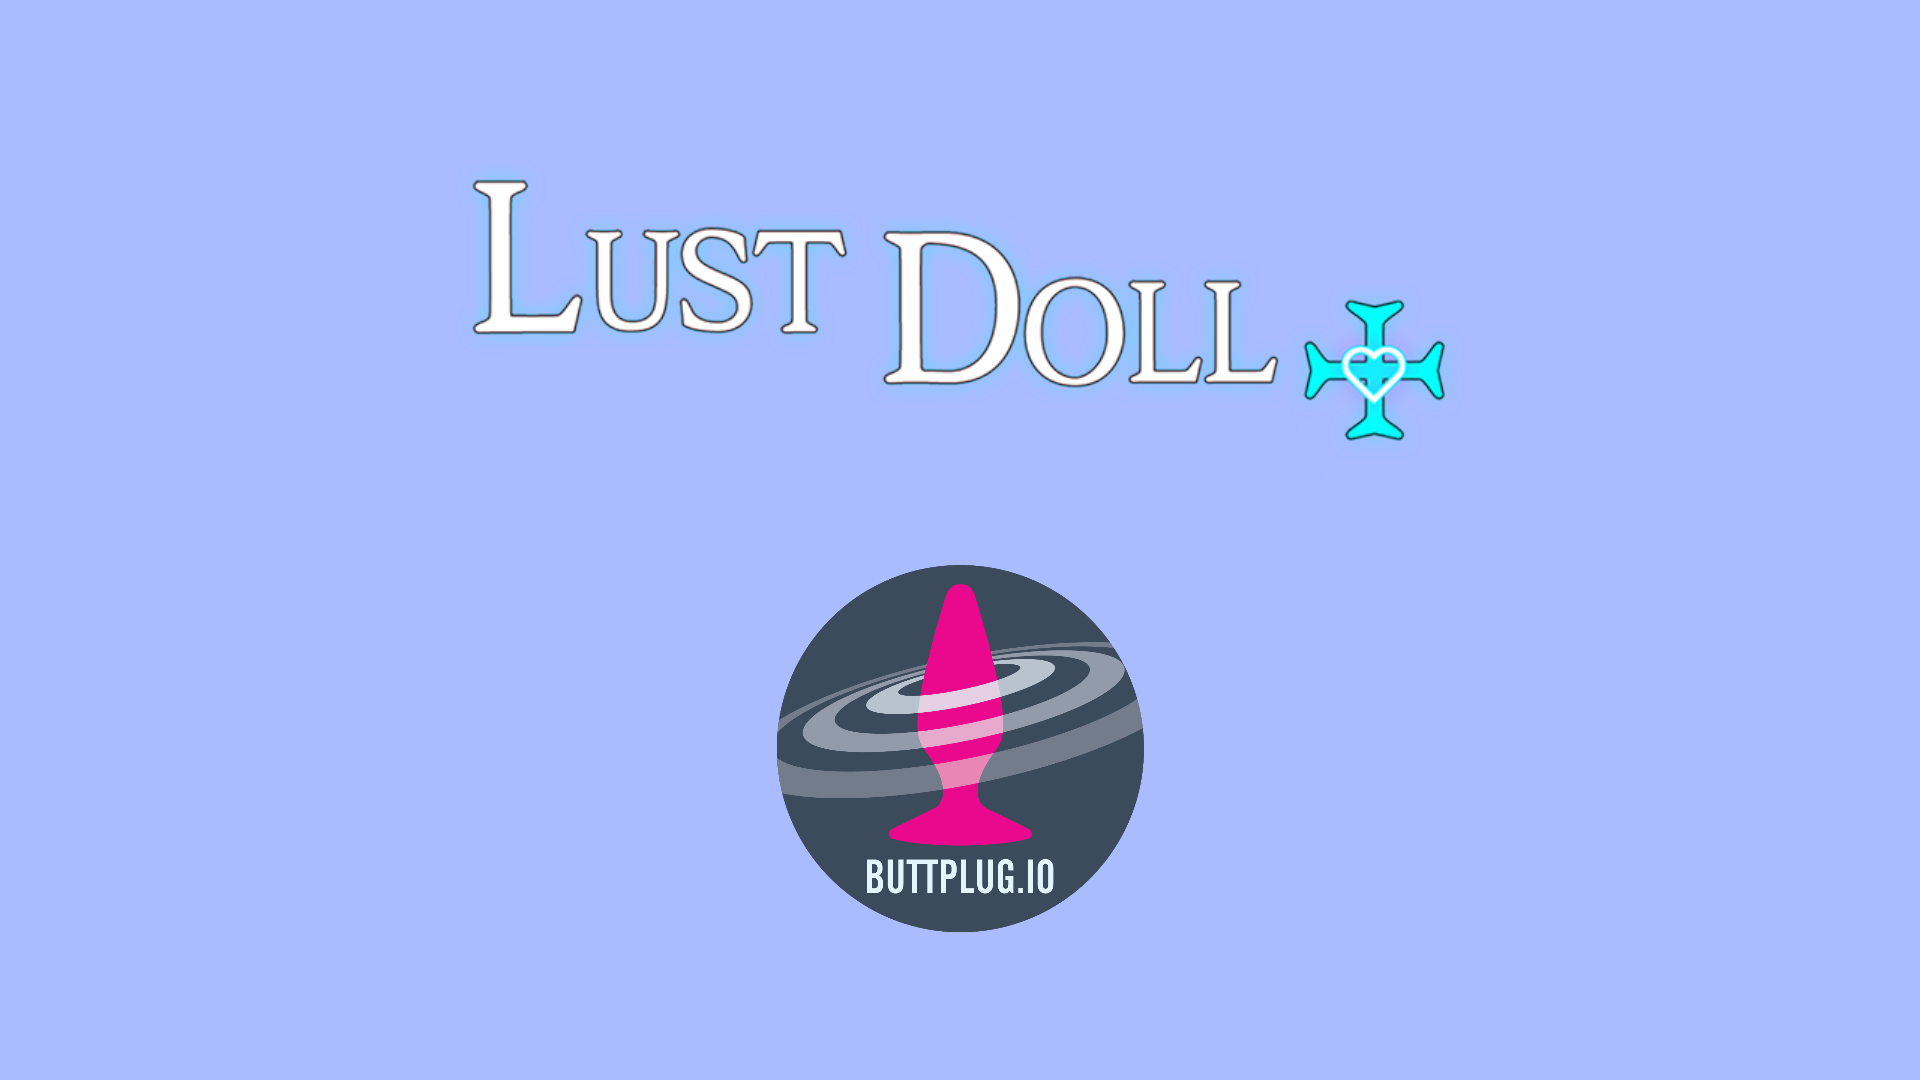 Lust Doll+ Buttplug.io support